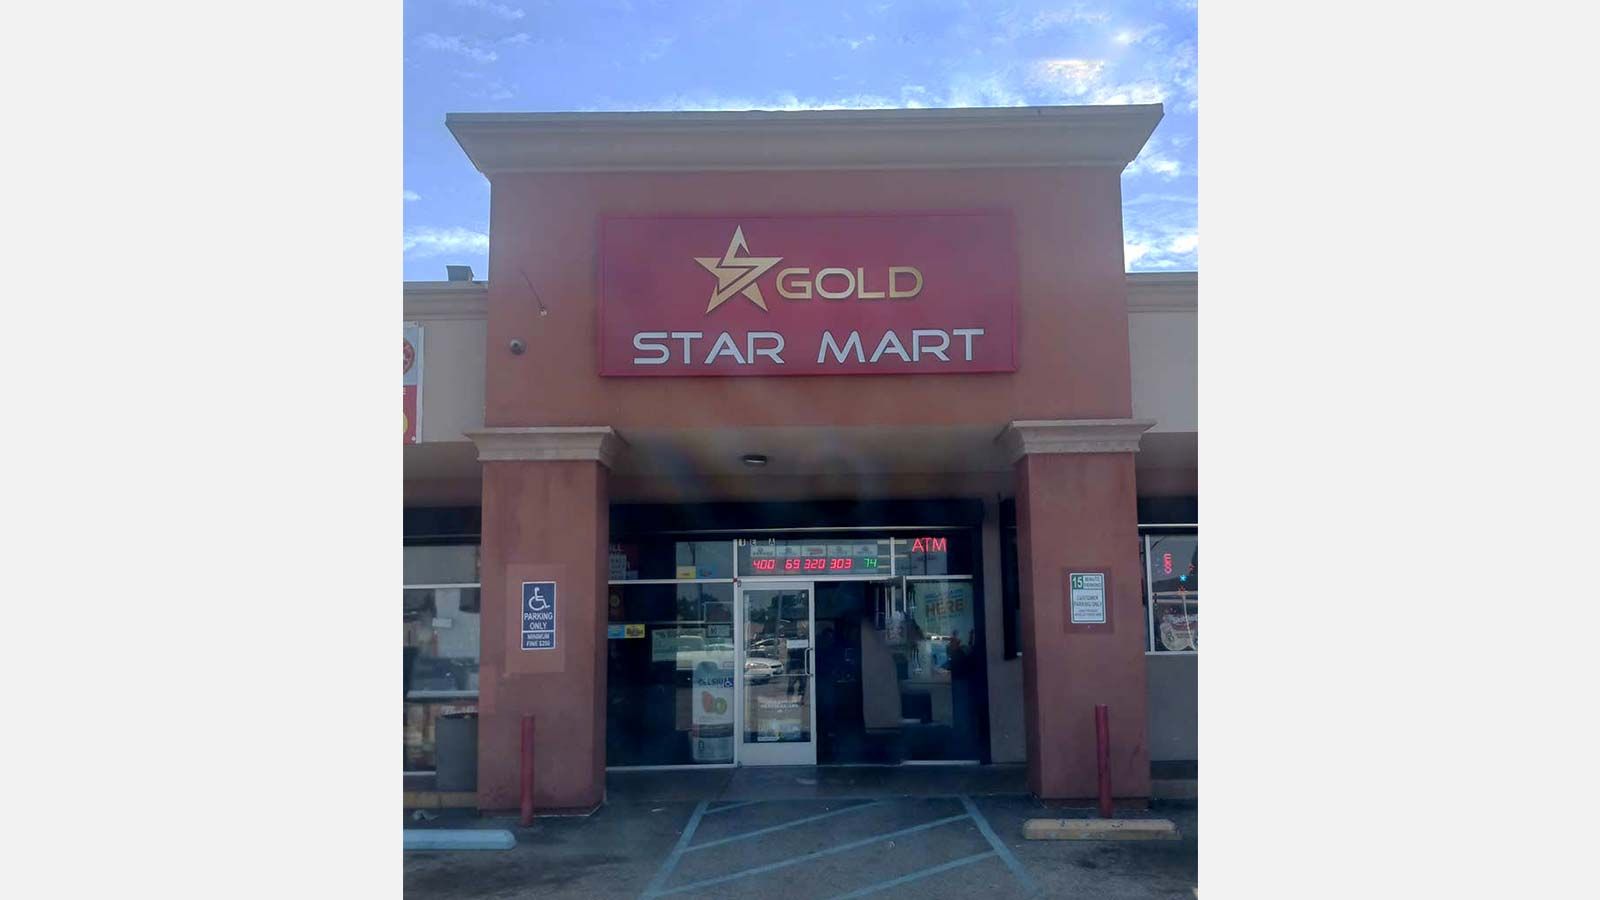 Gold Star Mart store sign face replacement for exterior use